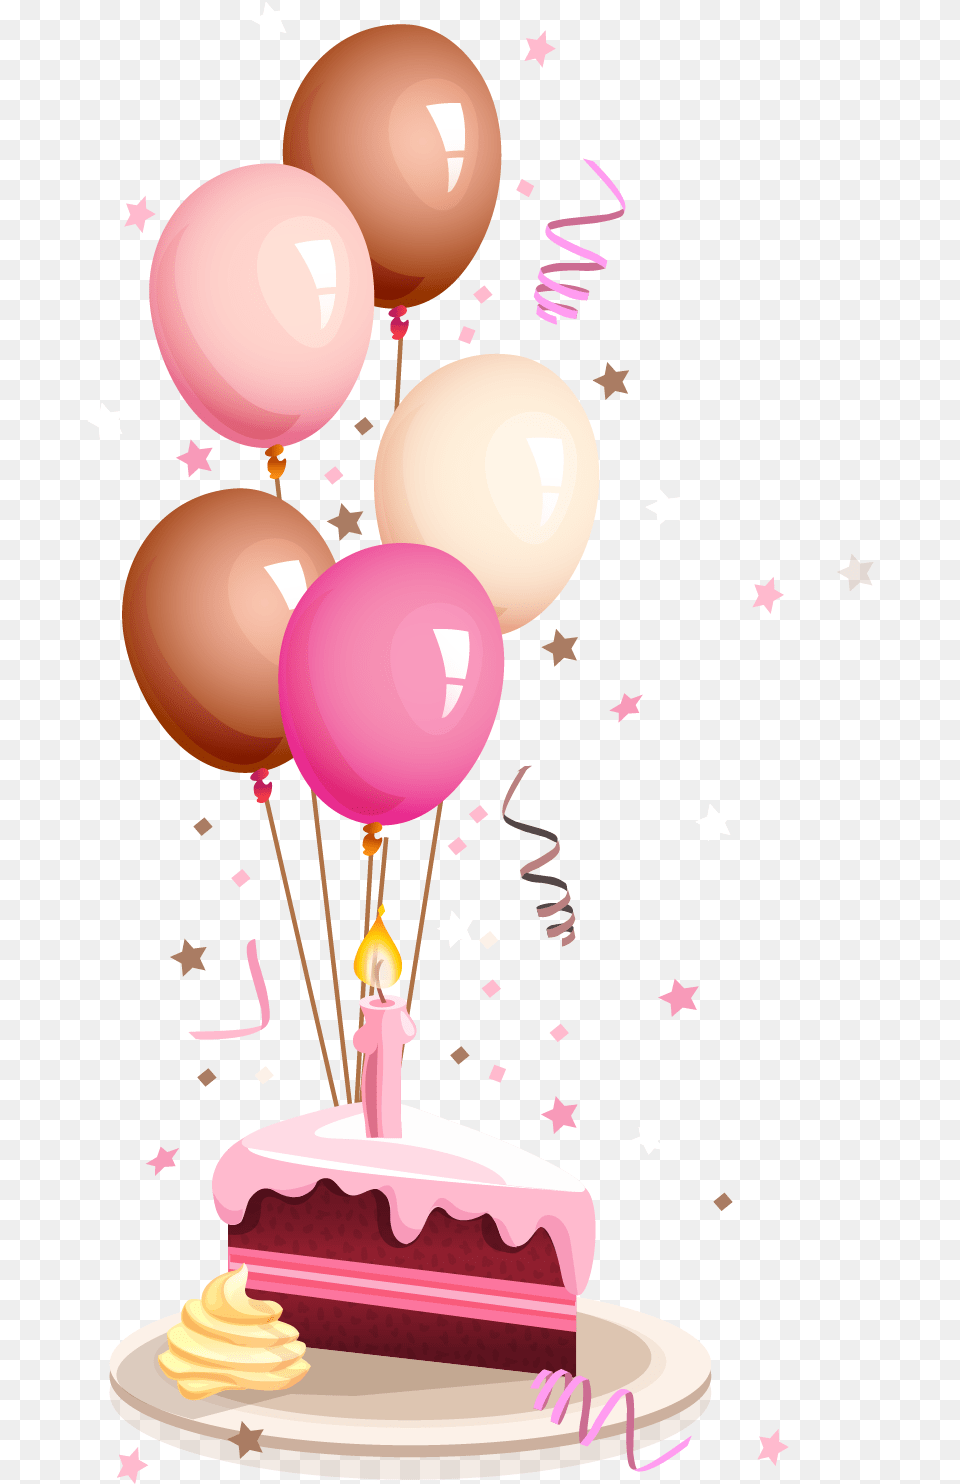 Download And Colorful Wish Greeting To Birthday Cake Clipart Happy Birthday To You, Person, People, Food, Dessert Png Image